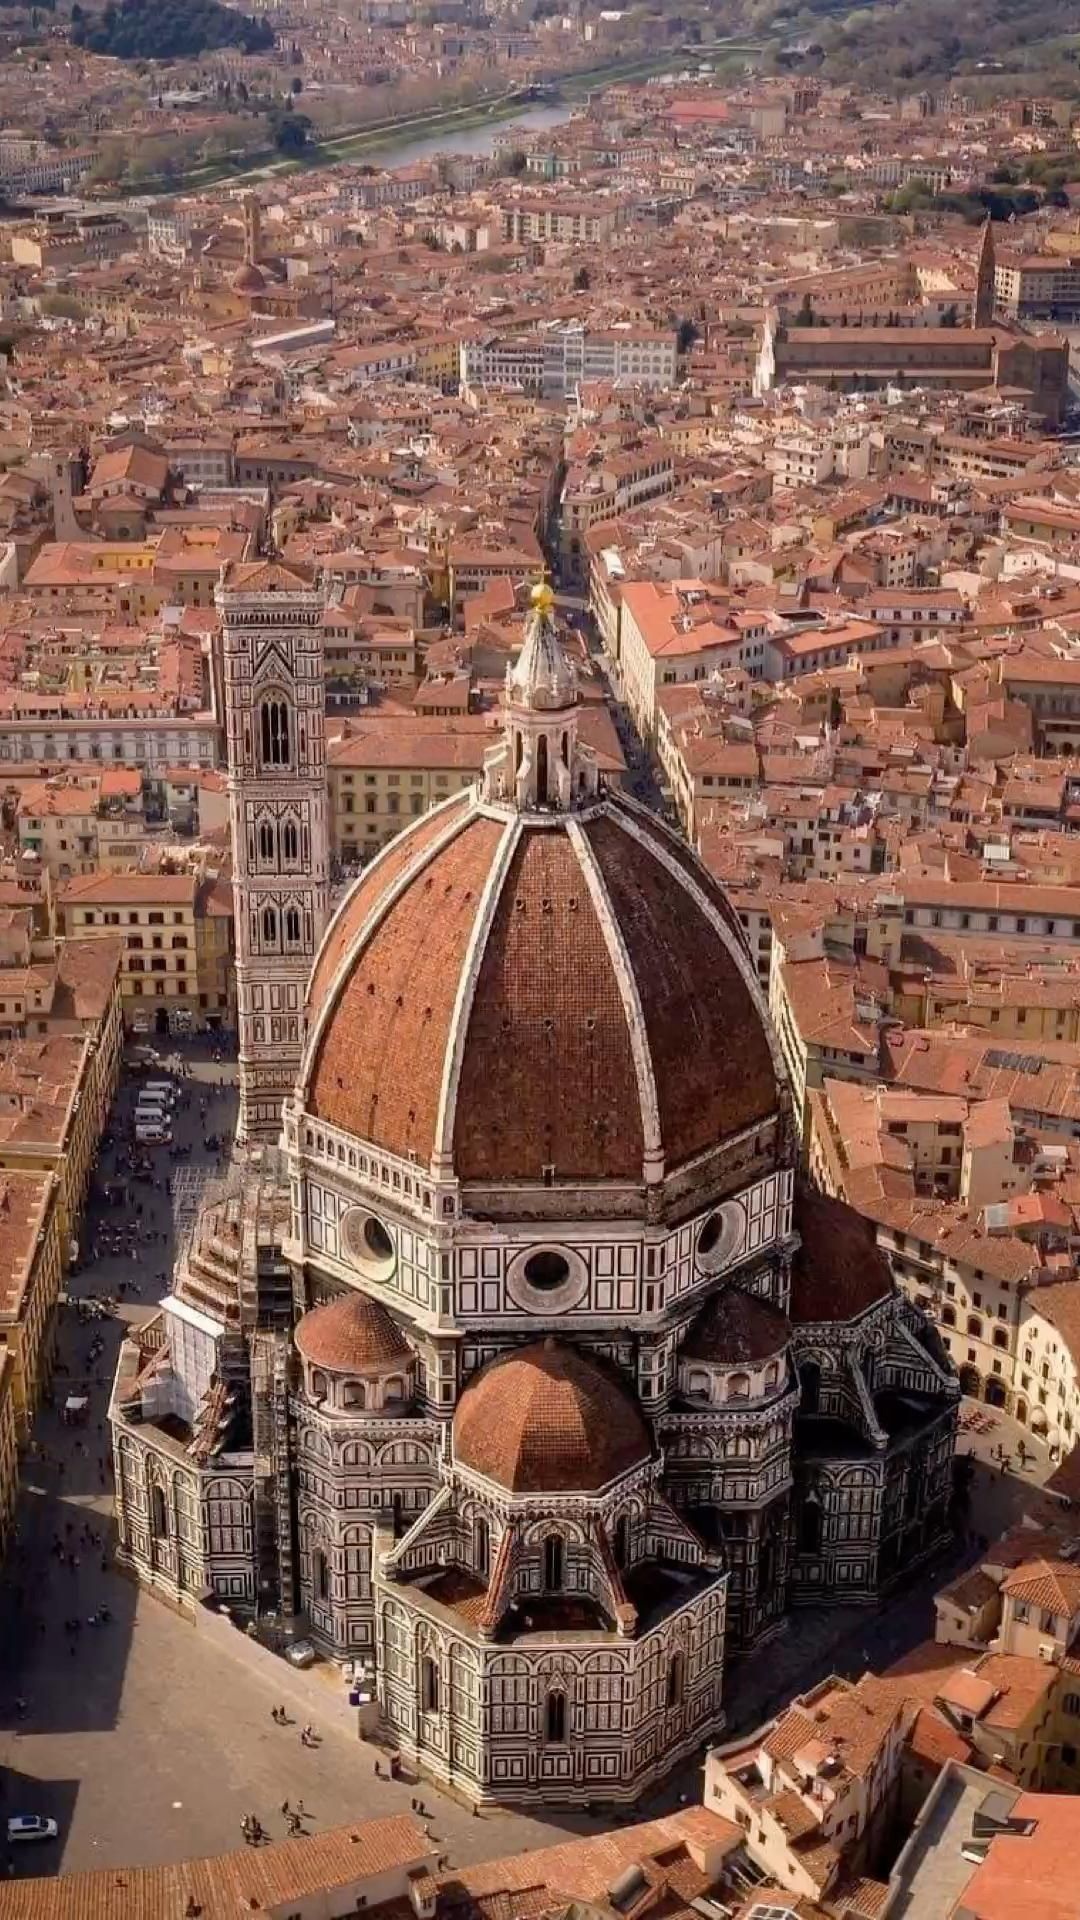 HD wallpaper, Phone Full Hd Florence Cathedral Wallpaper Image, 1080X1920 Full Hd Phone, Creative Vision, Design Aesthetics, Artistic Inspiration, Architectural Wallpaper